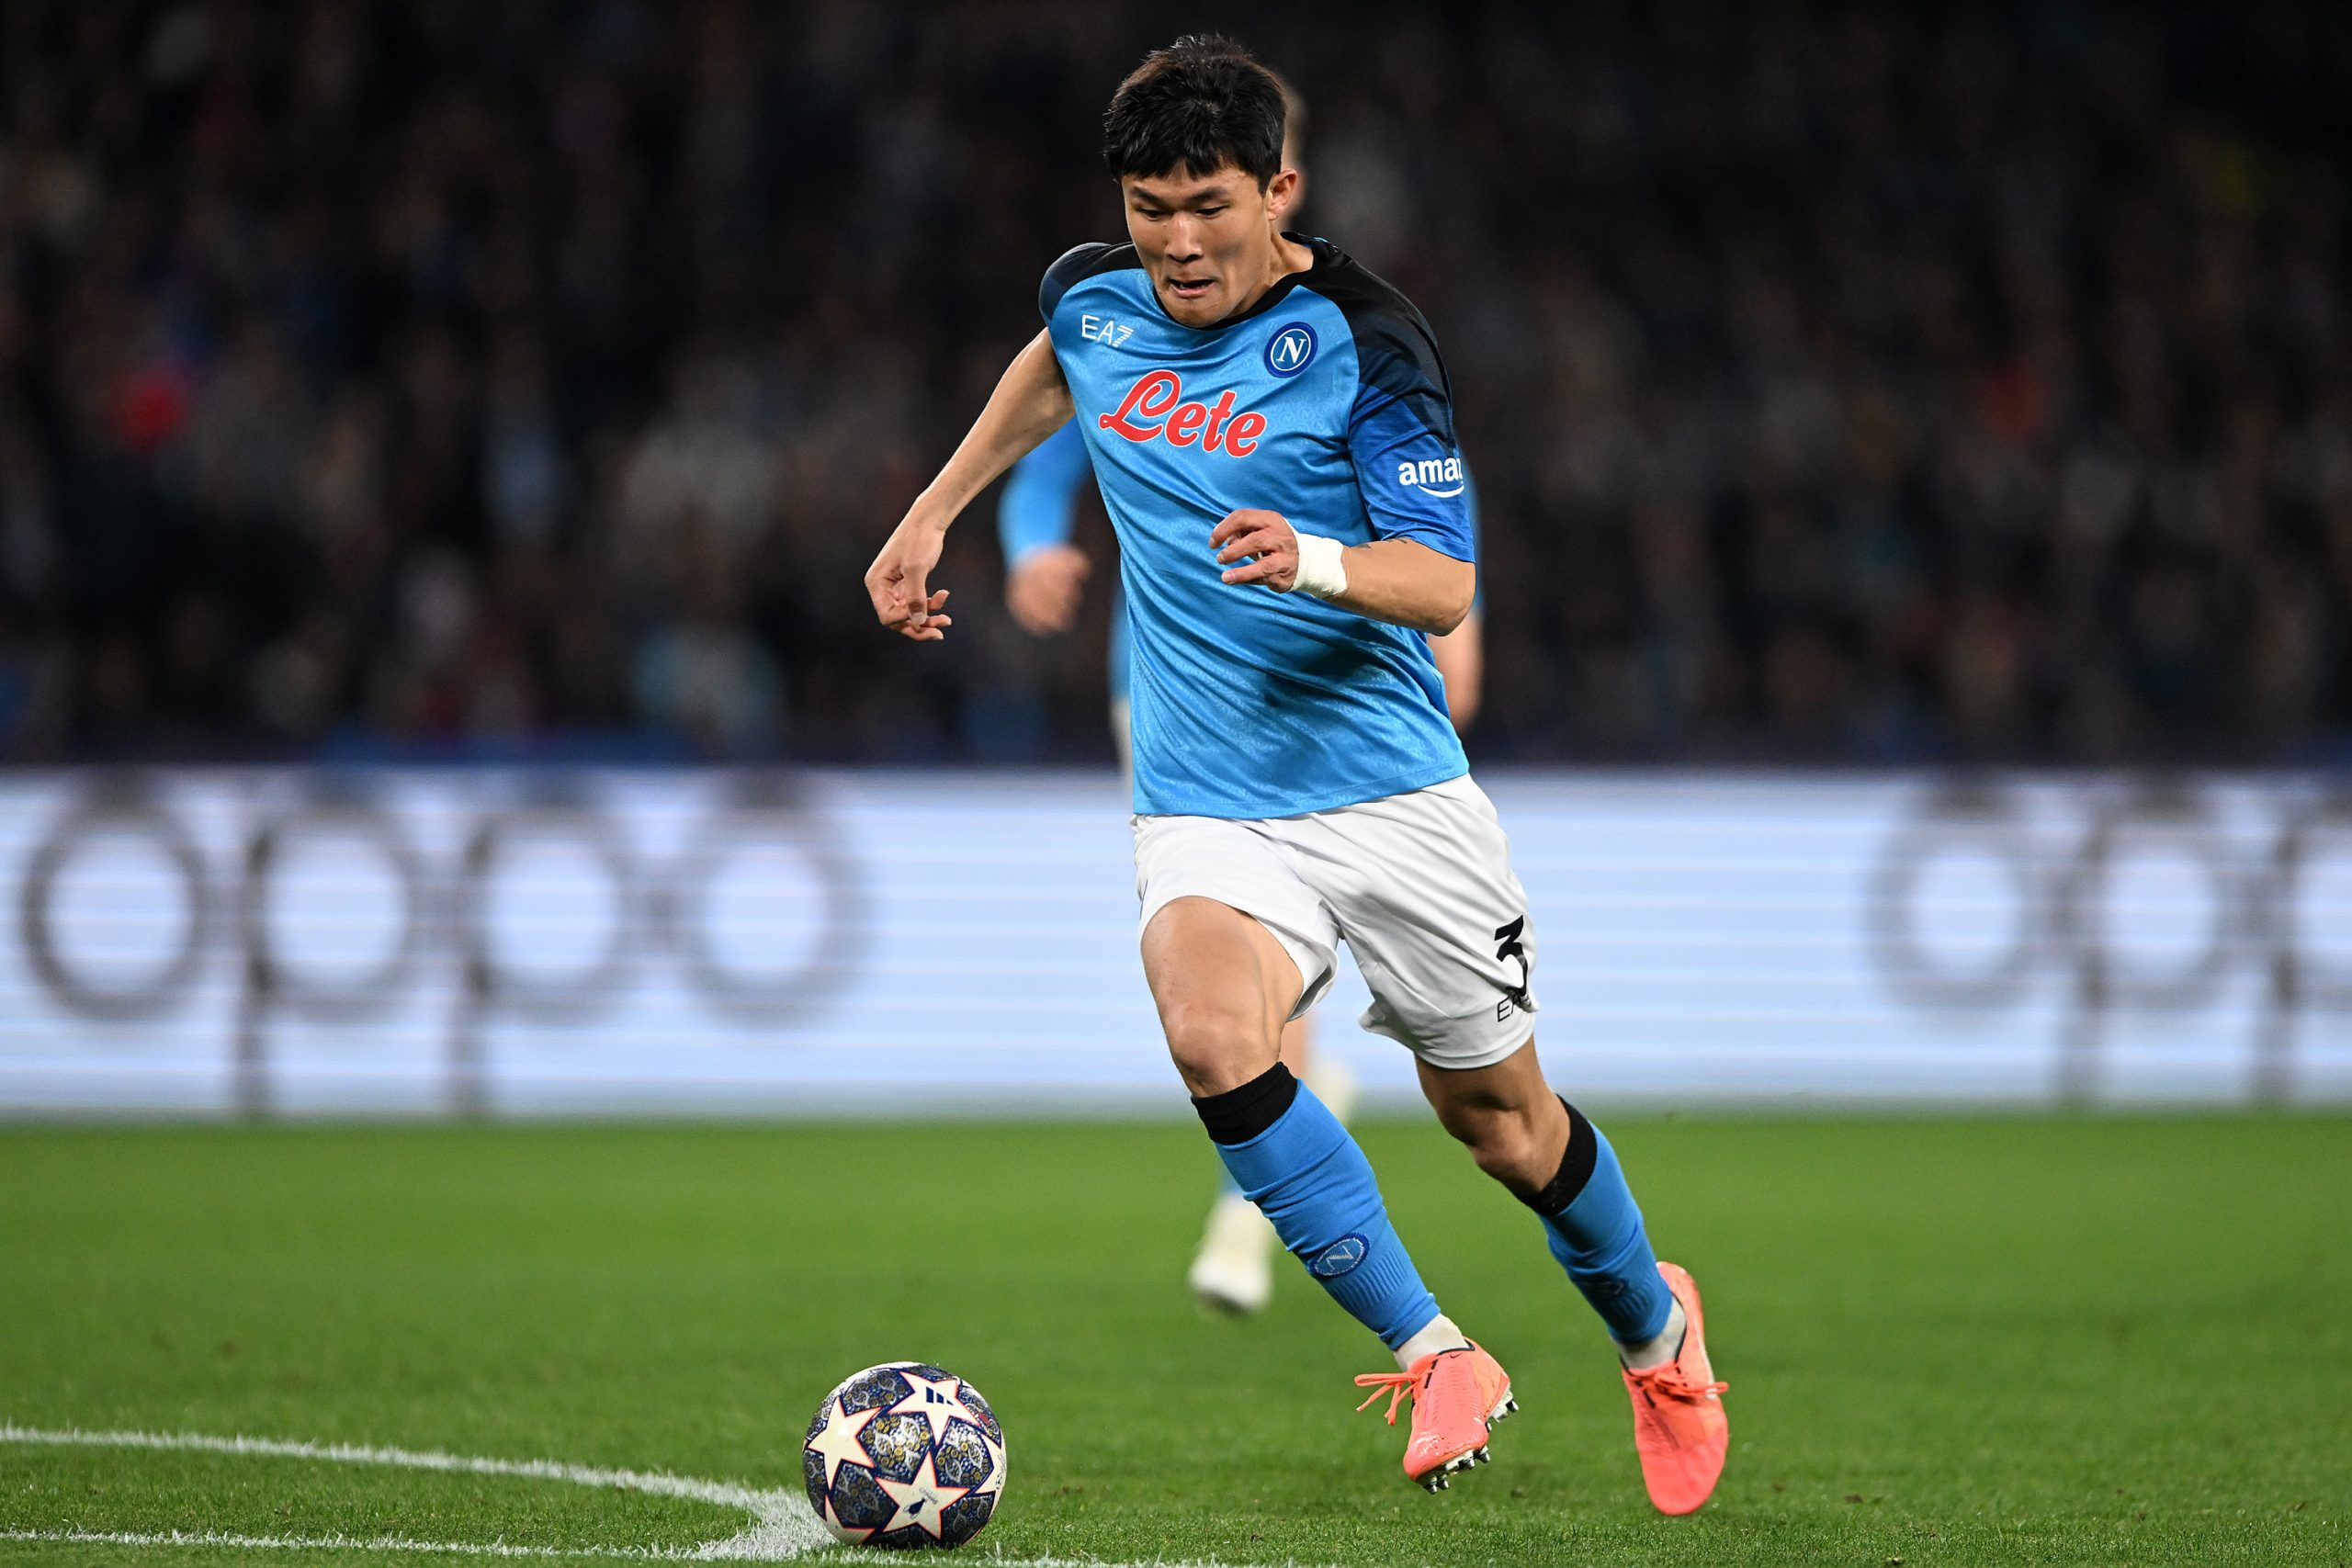 Bayern Munich reach agreement with Manchester United target and Napoli centre-back Kim Min-jae.